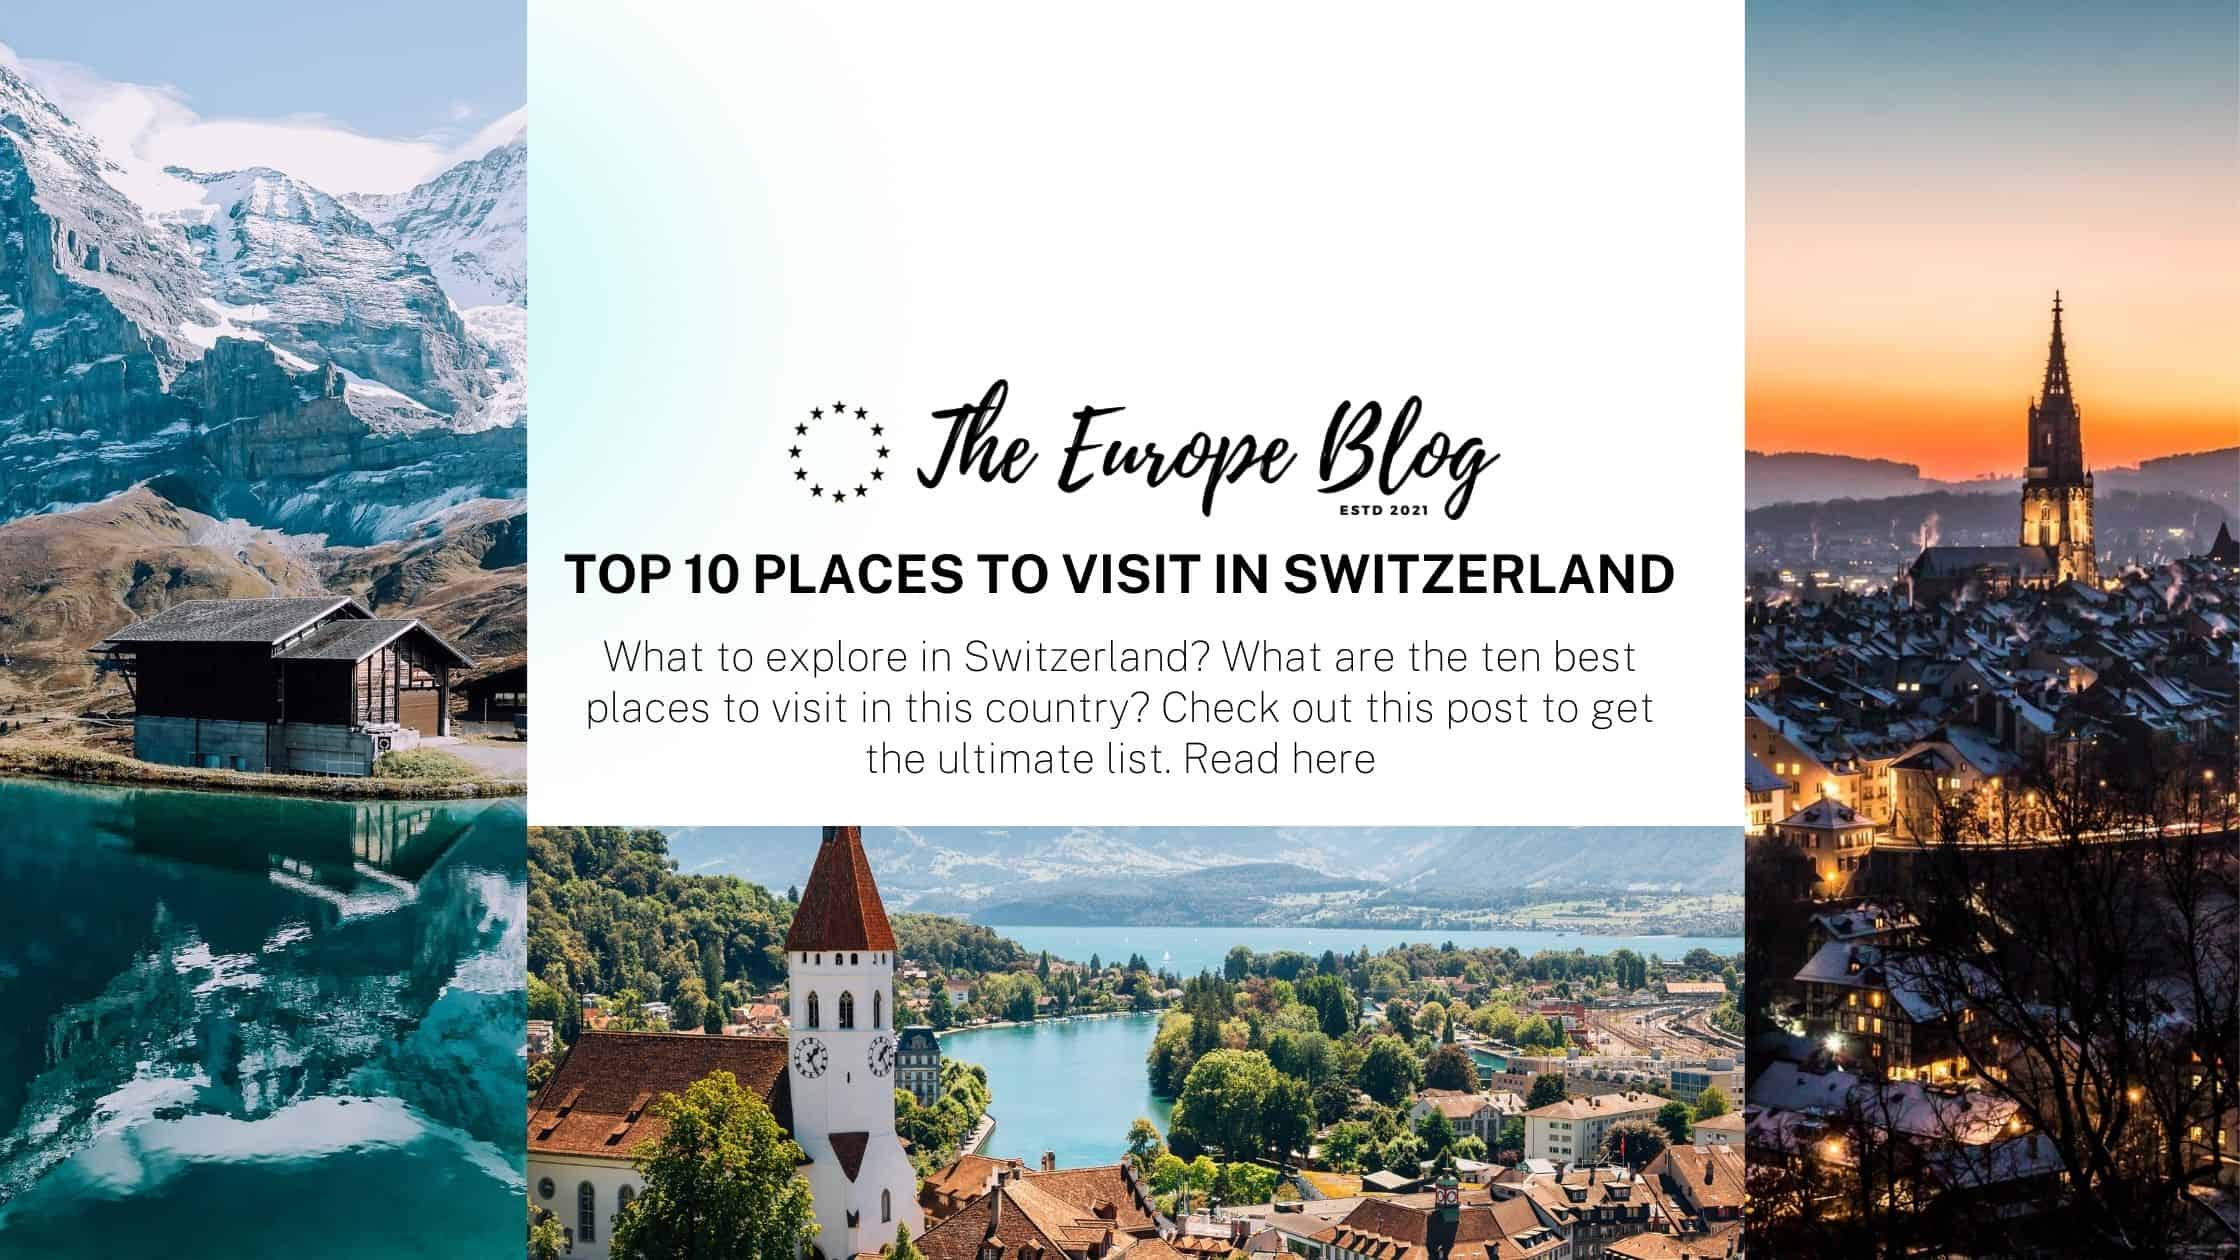 Top 10 places to visit in Switzerland